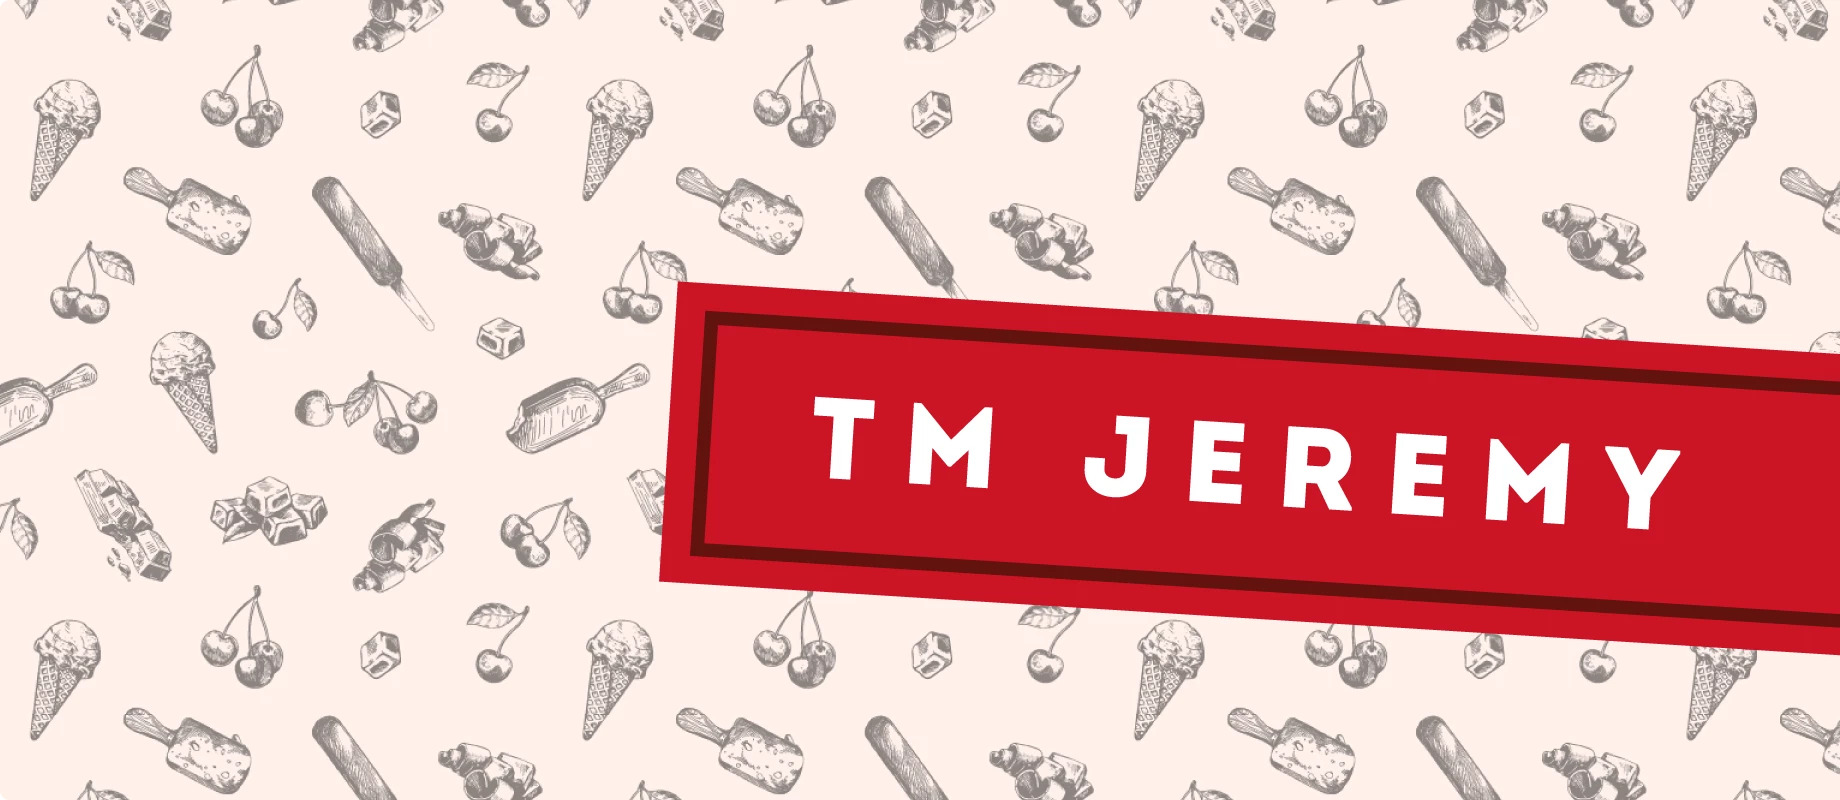 Packaging for the Jeremy ice cream